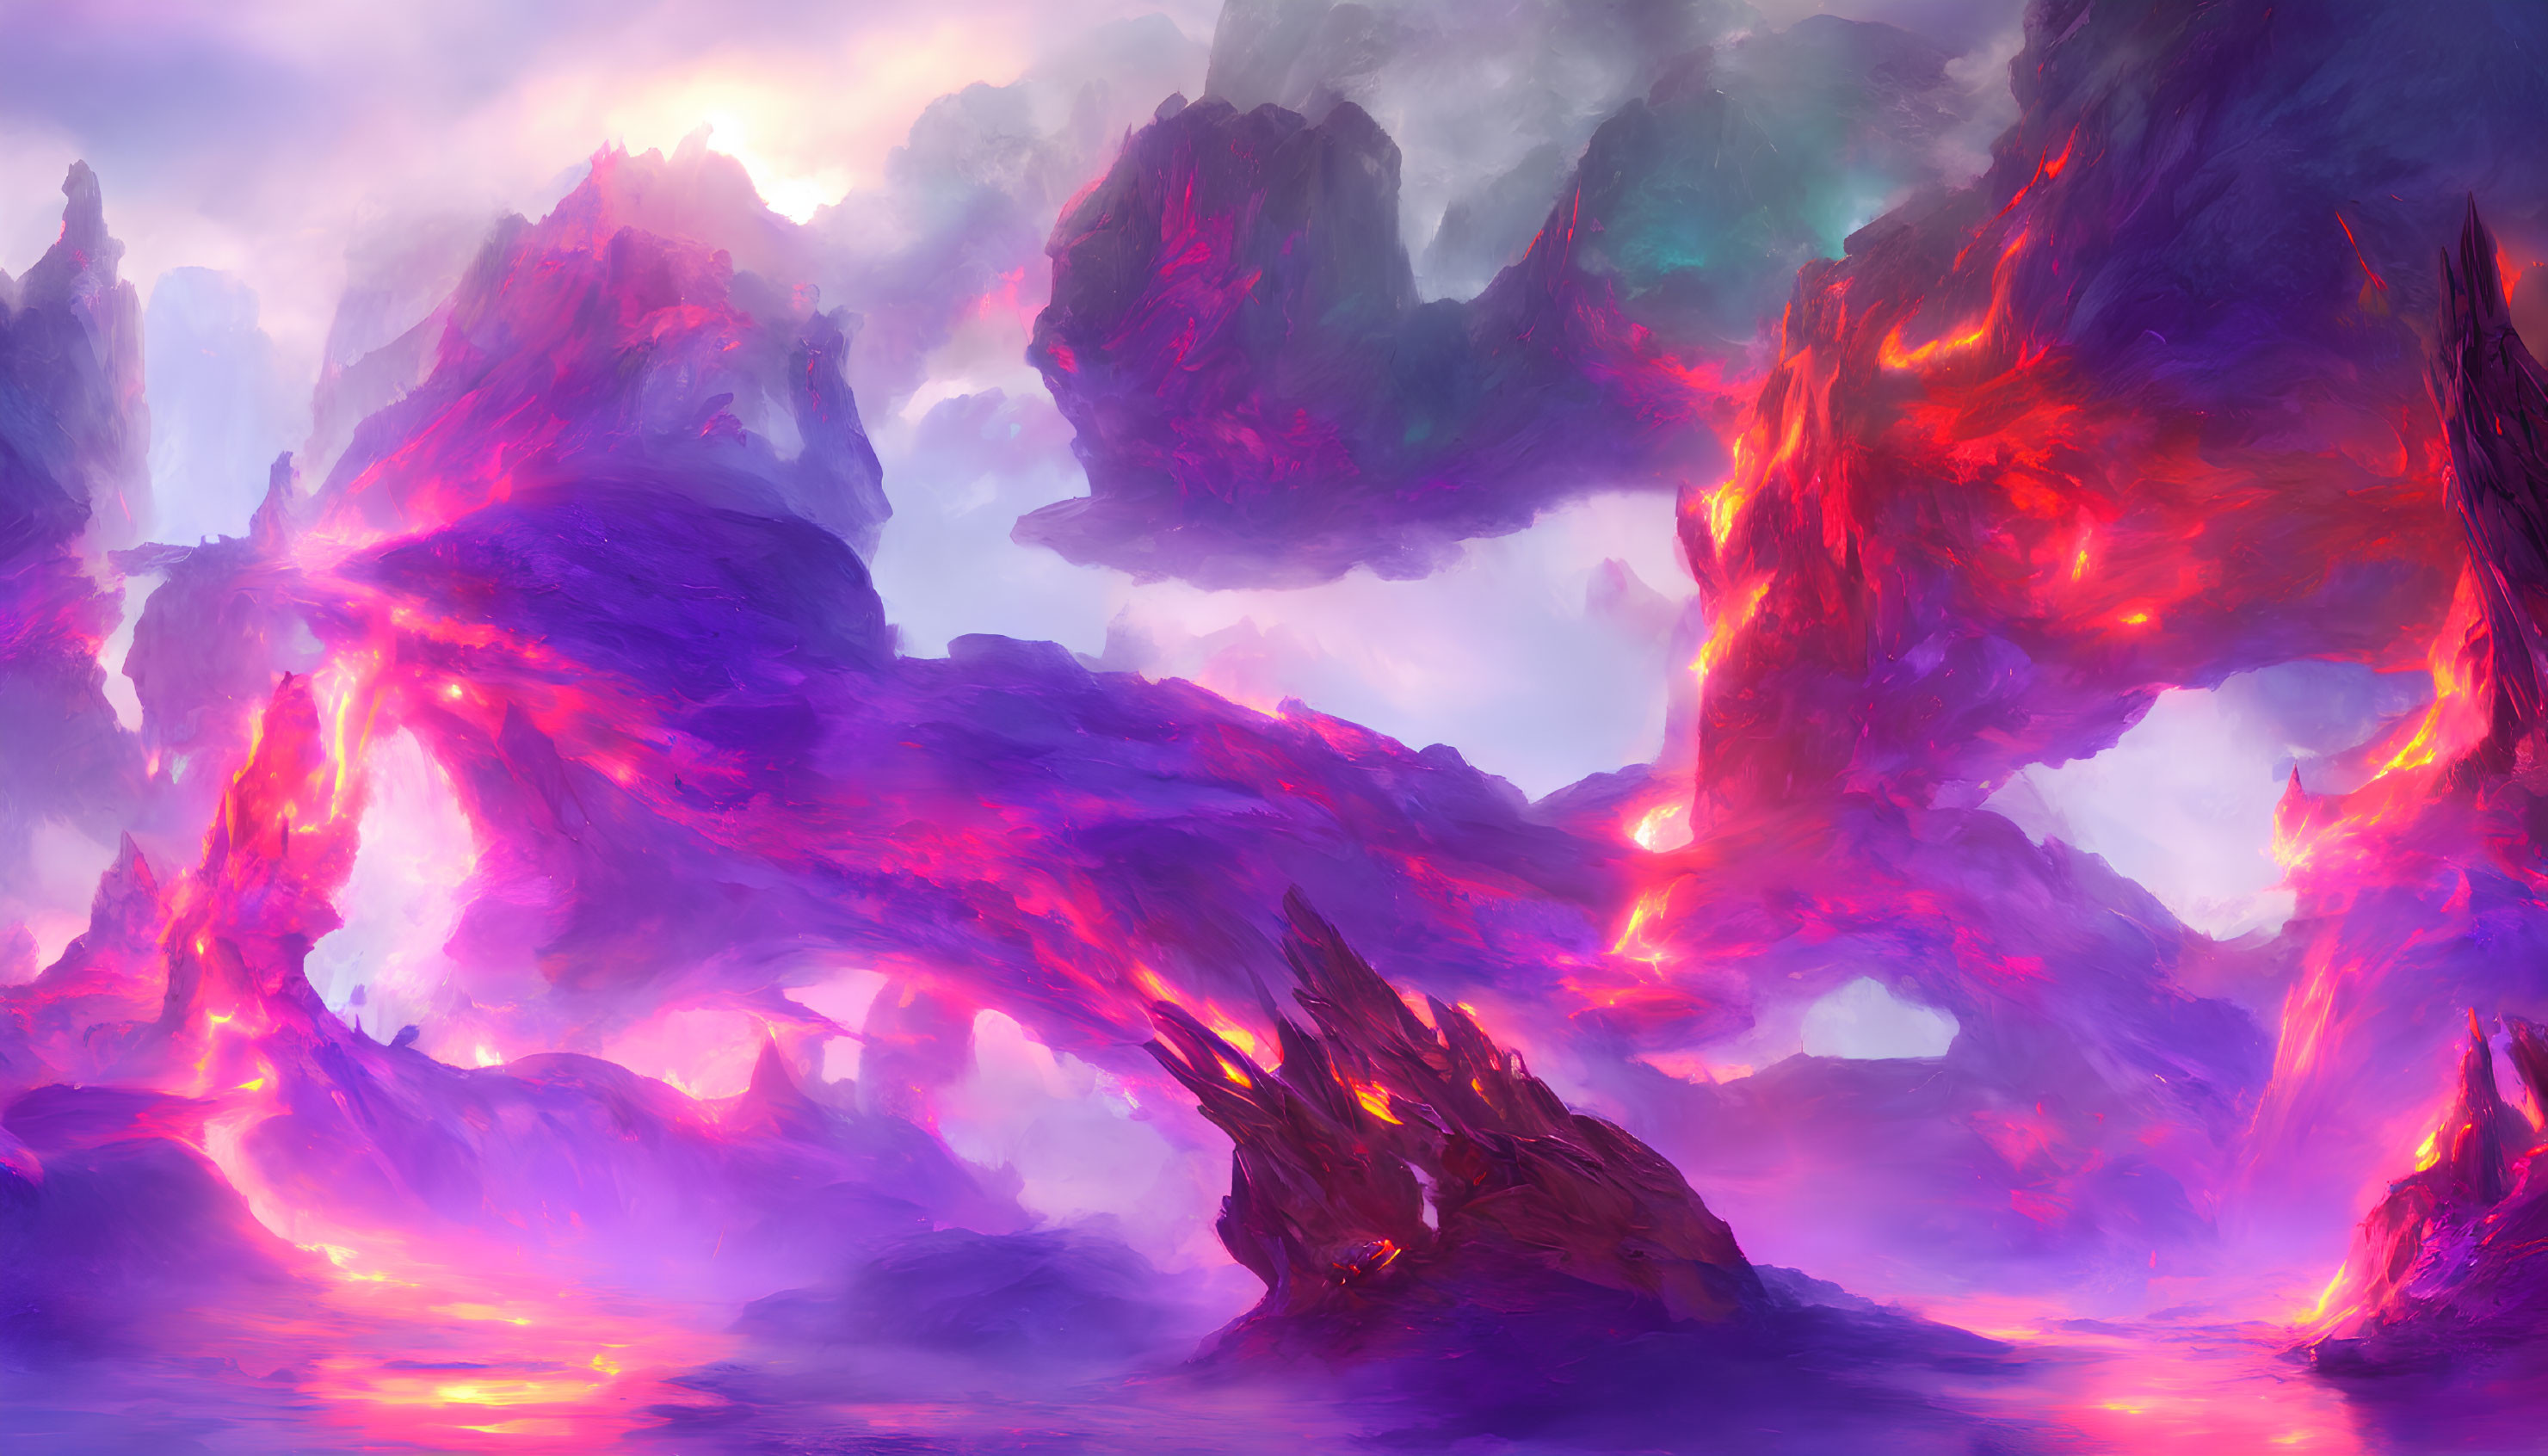 Surreal fantasy landscape with glowing magenta and purple hues